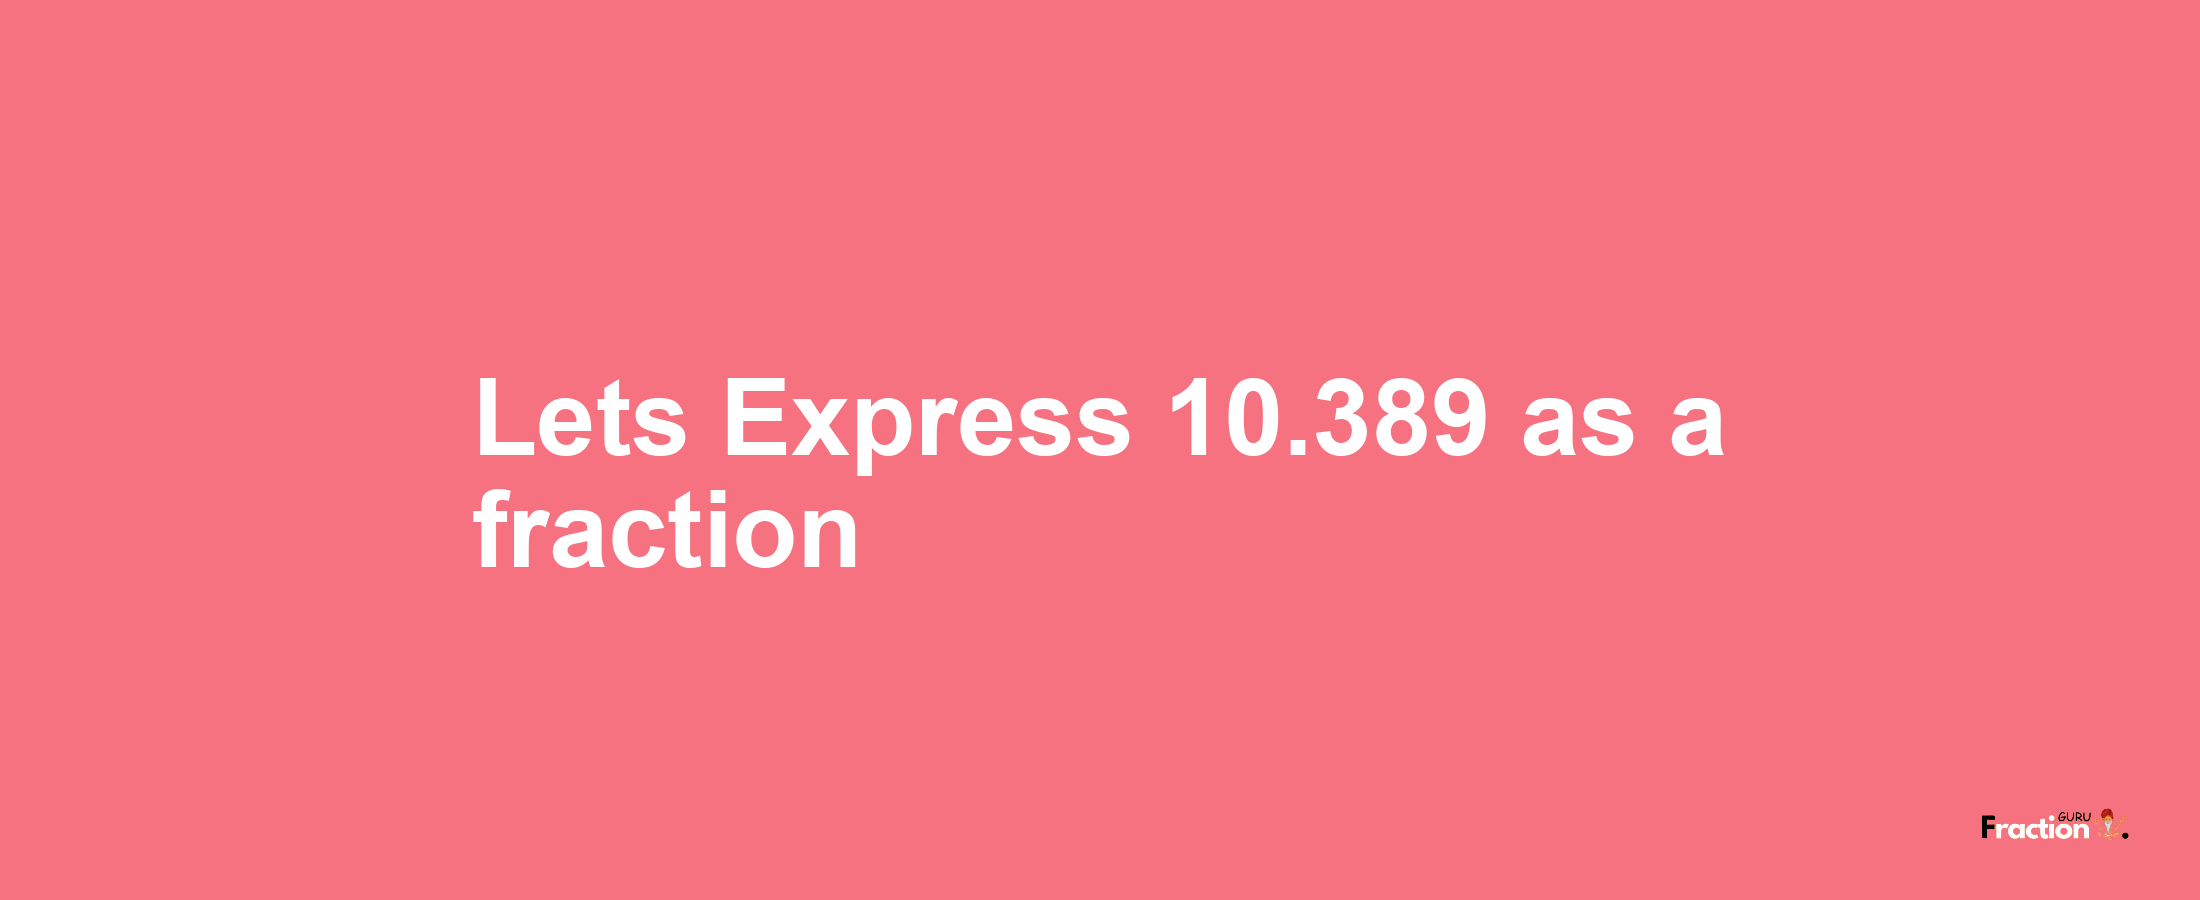 Lets Express 10.389 as afraction